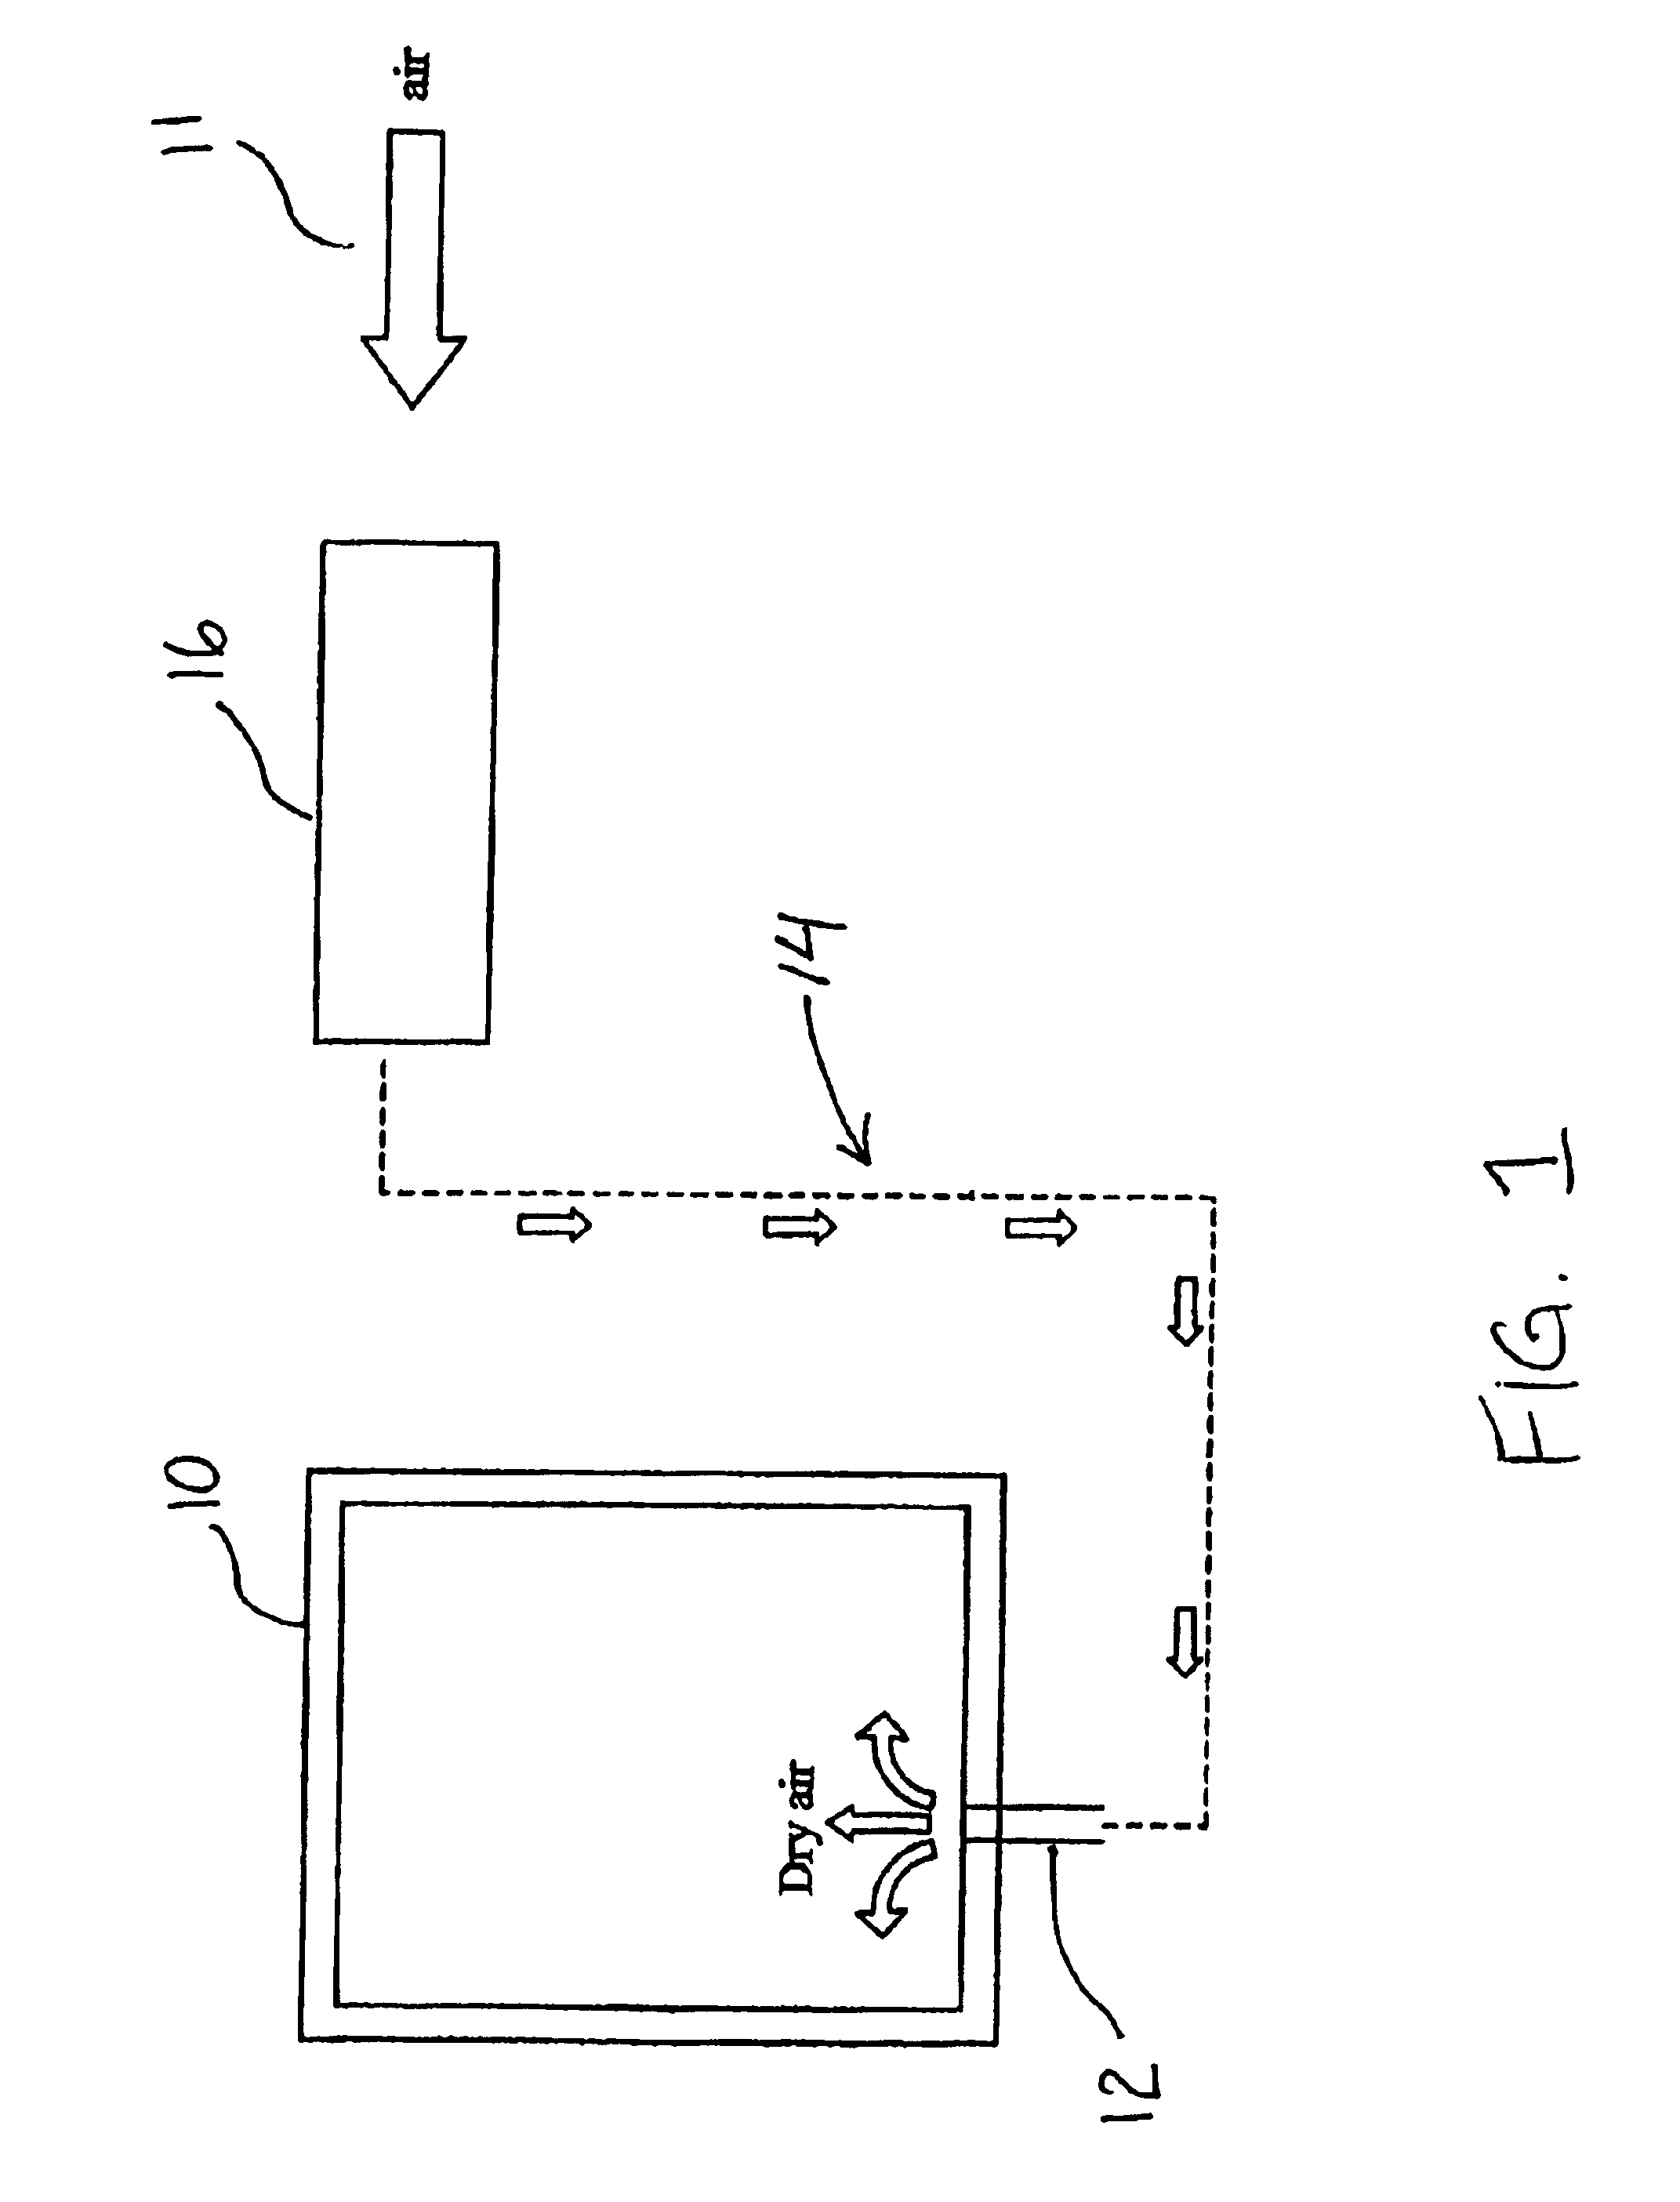 Dryer system for the prevention of frost in an ultra low temperature freezer